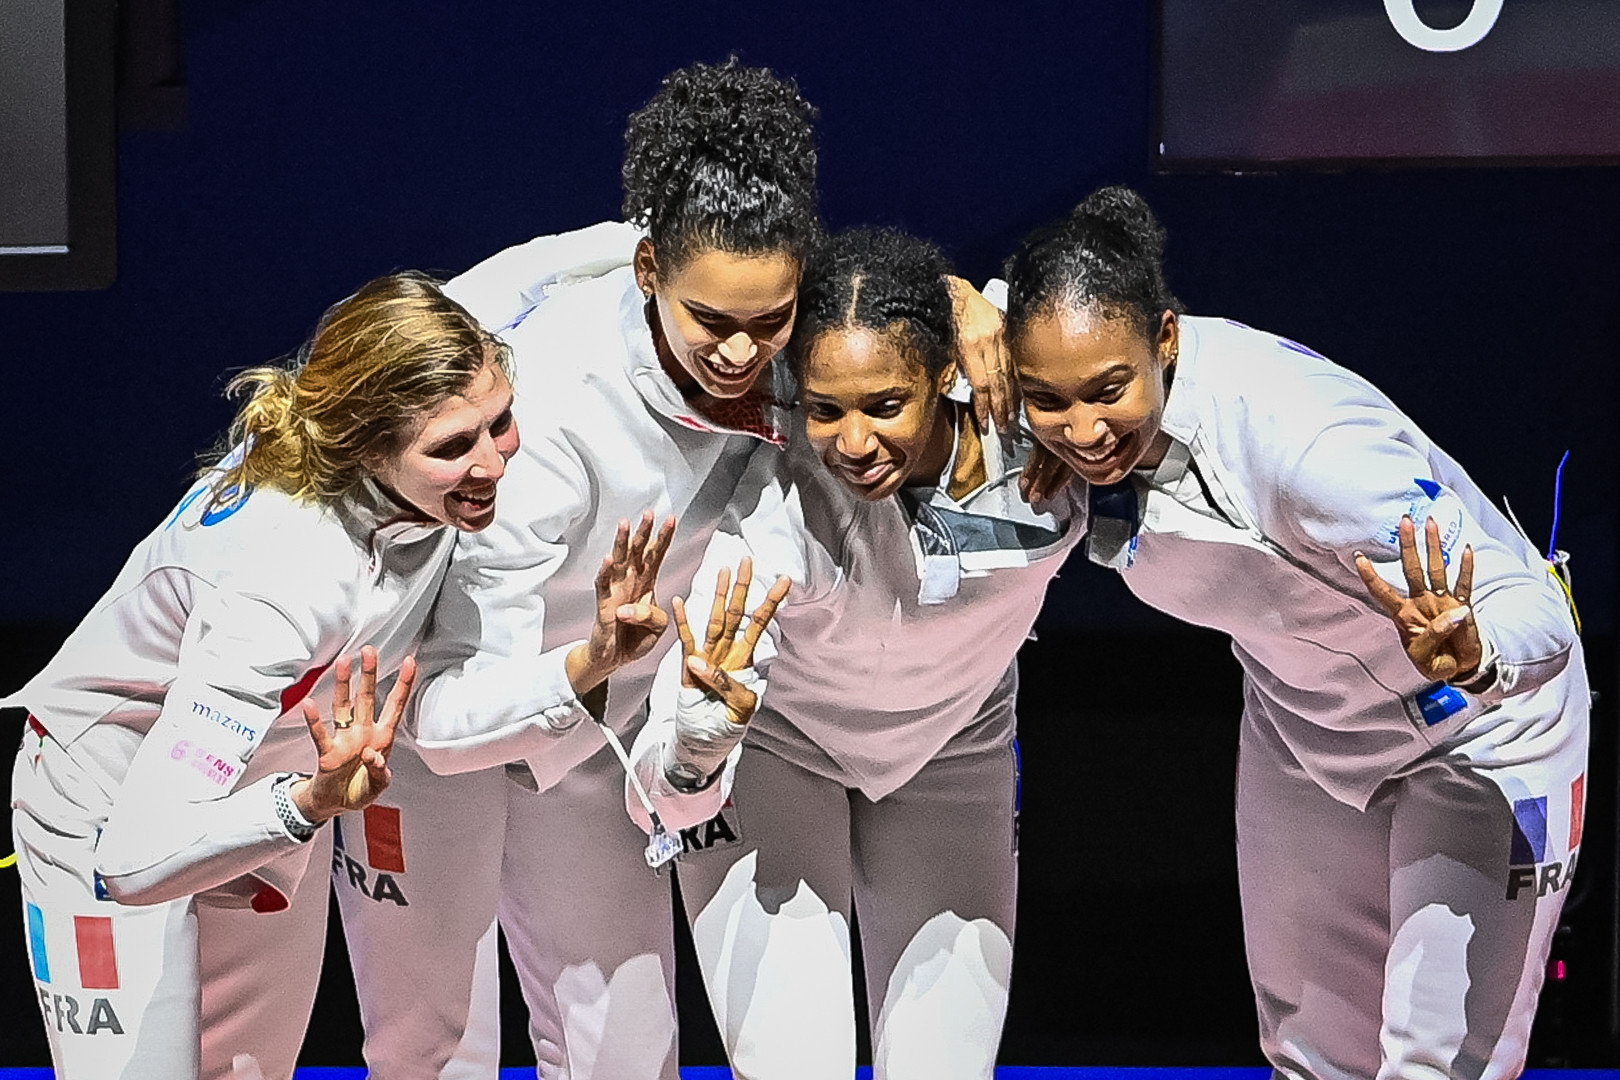 High drama as France’s late lunge earns women’s épée team gold at European Games